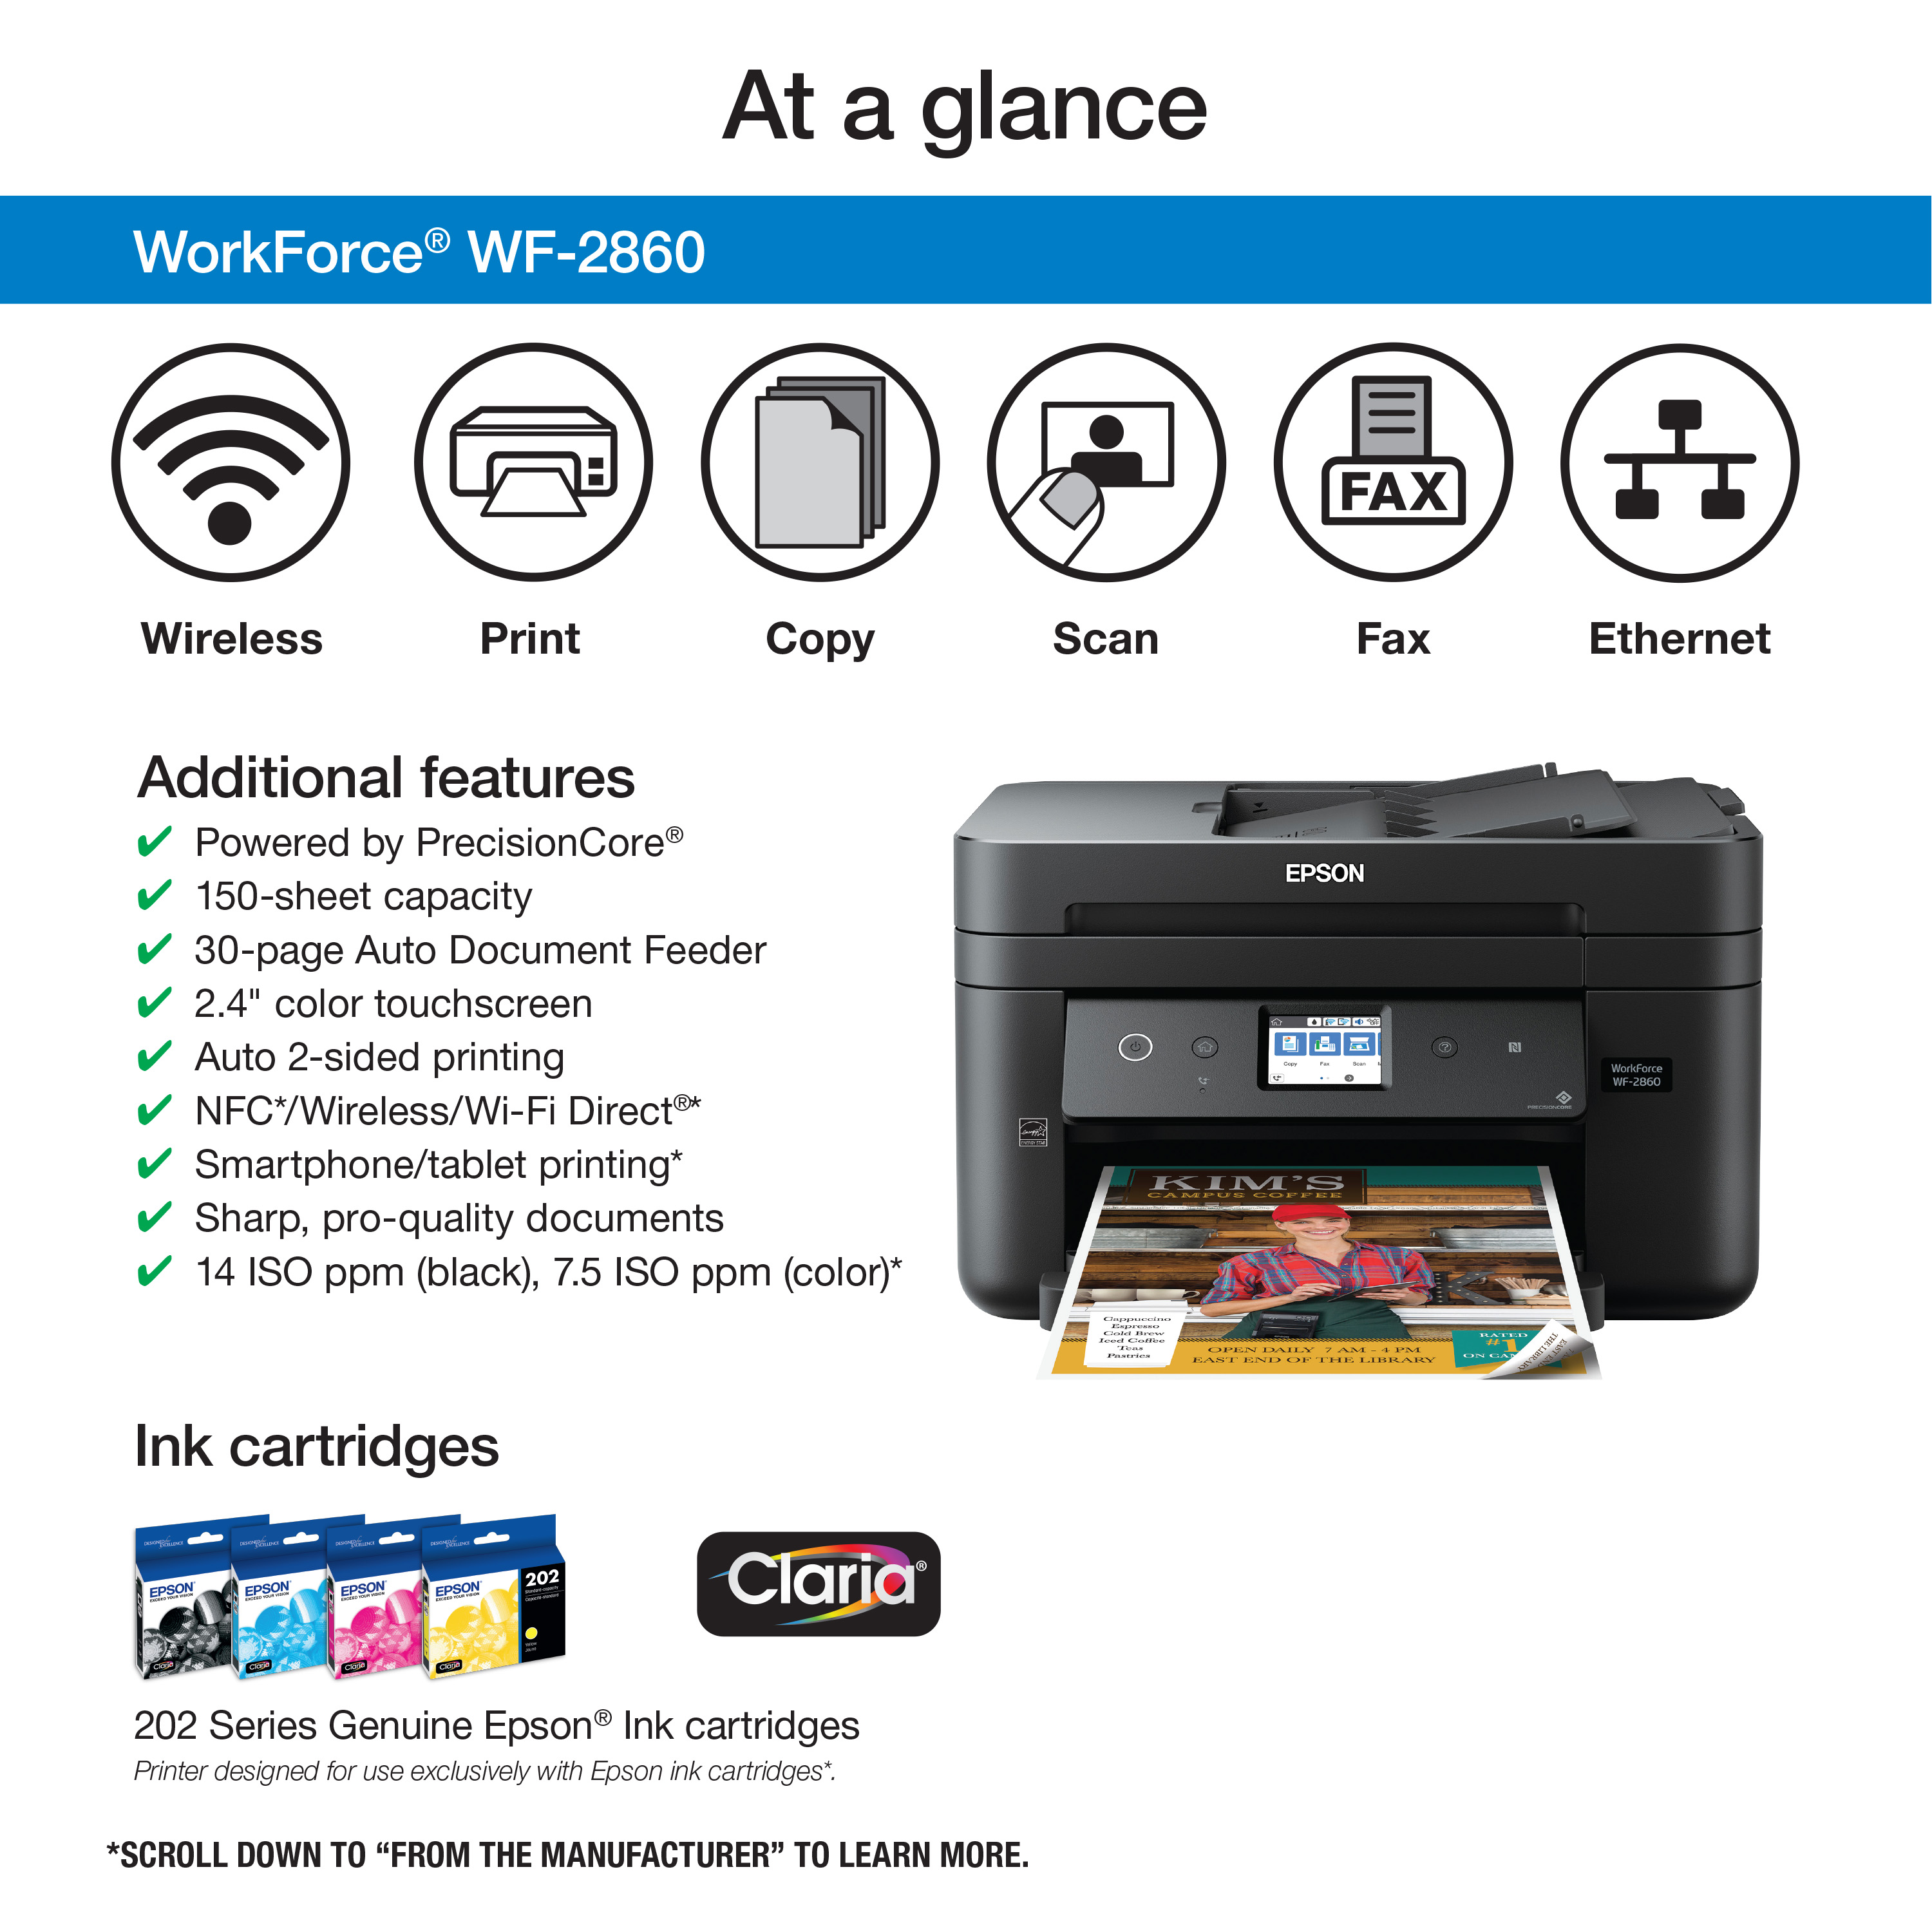 Epson WorkForce WF-2860 All-in-One Wireless Color Printer with Scanner, Copier, Fax, Ethernet, Wi-Fi Direct and NFC - image 3 of 6